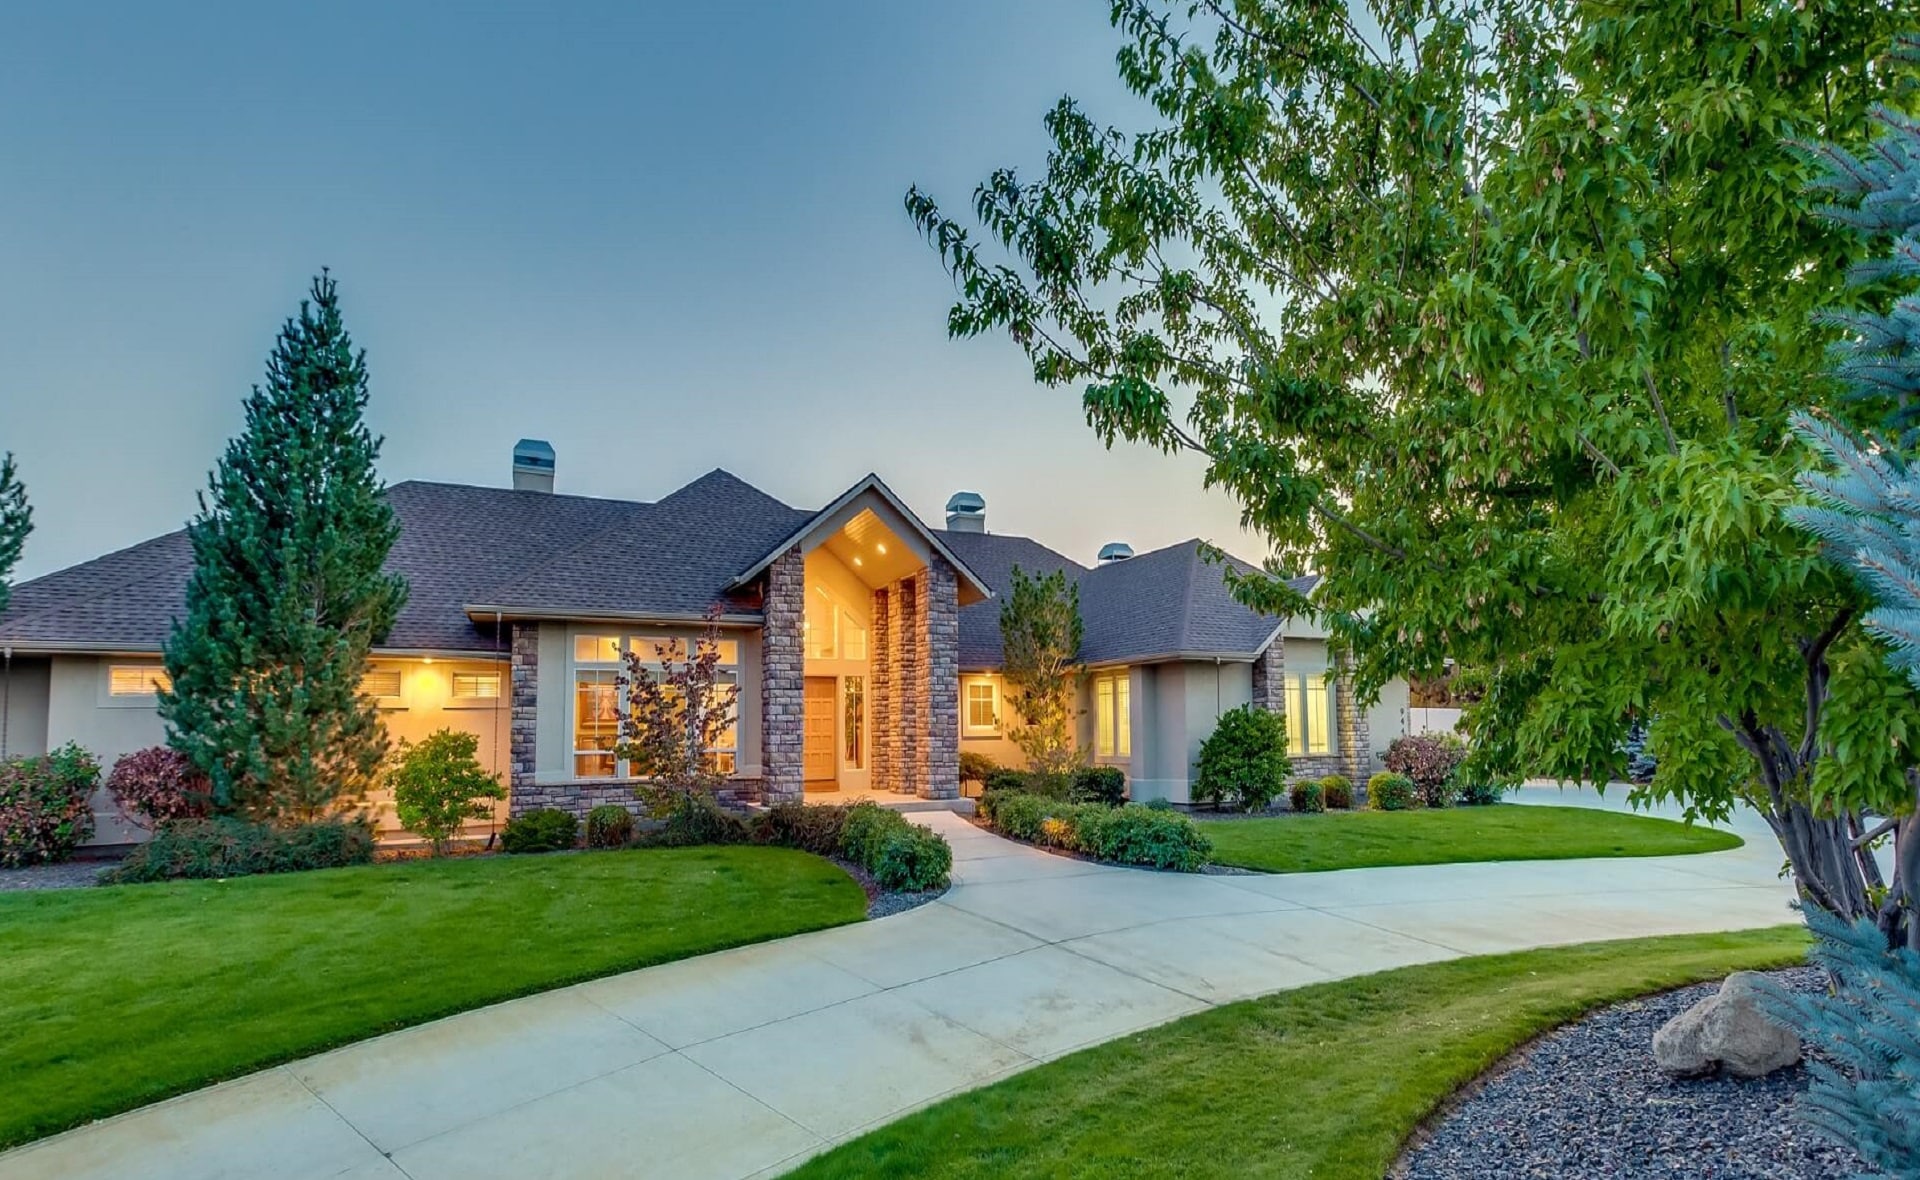 Beutiful Hillsdale Home in Star at dusk front view